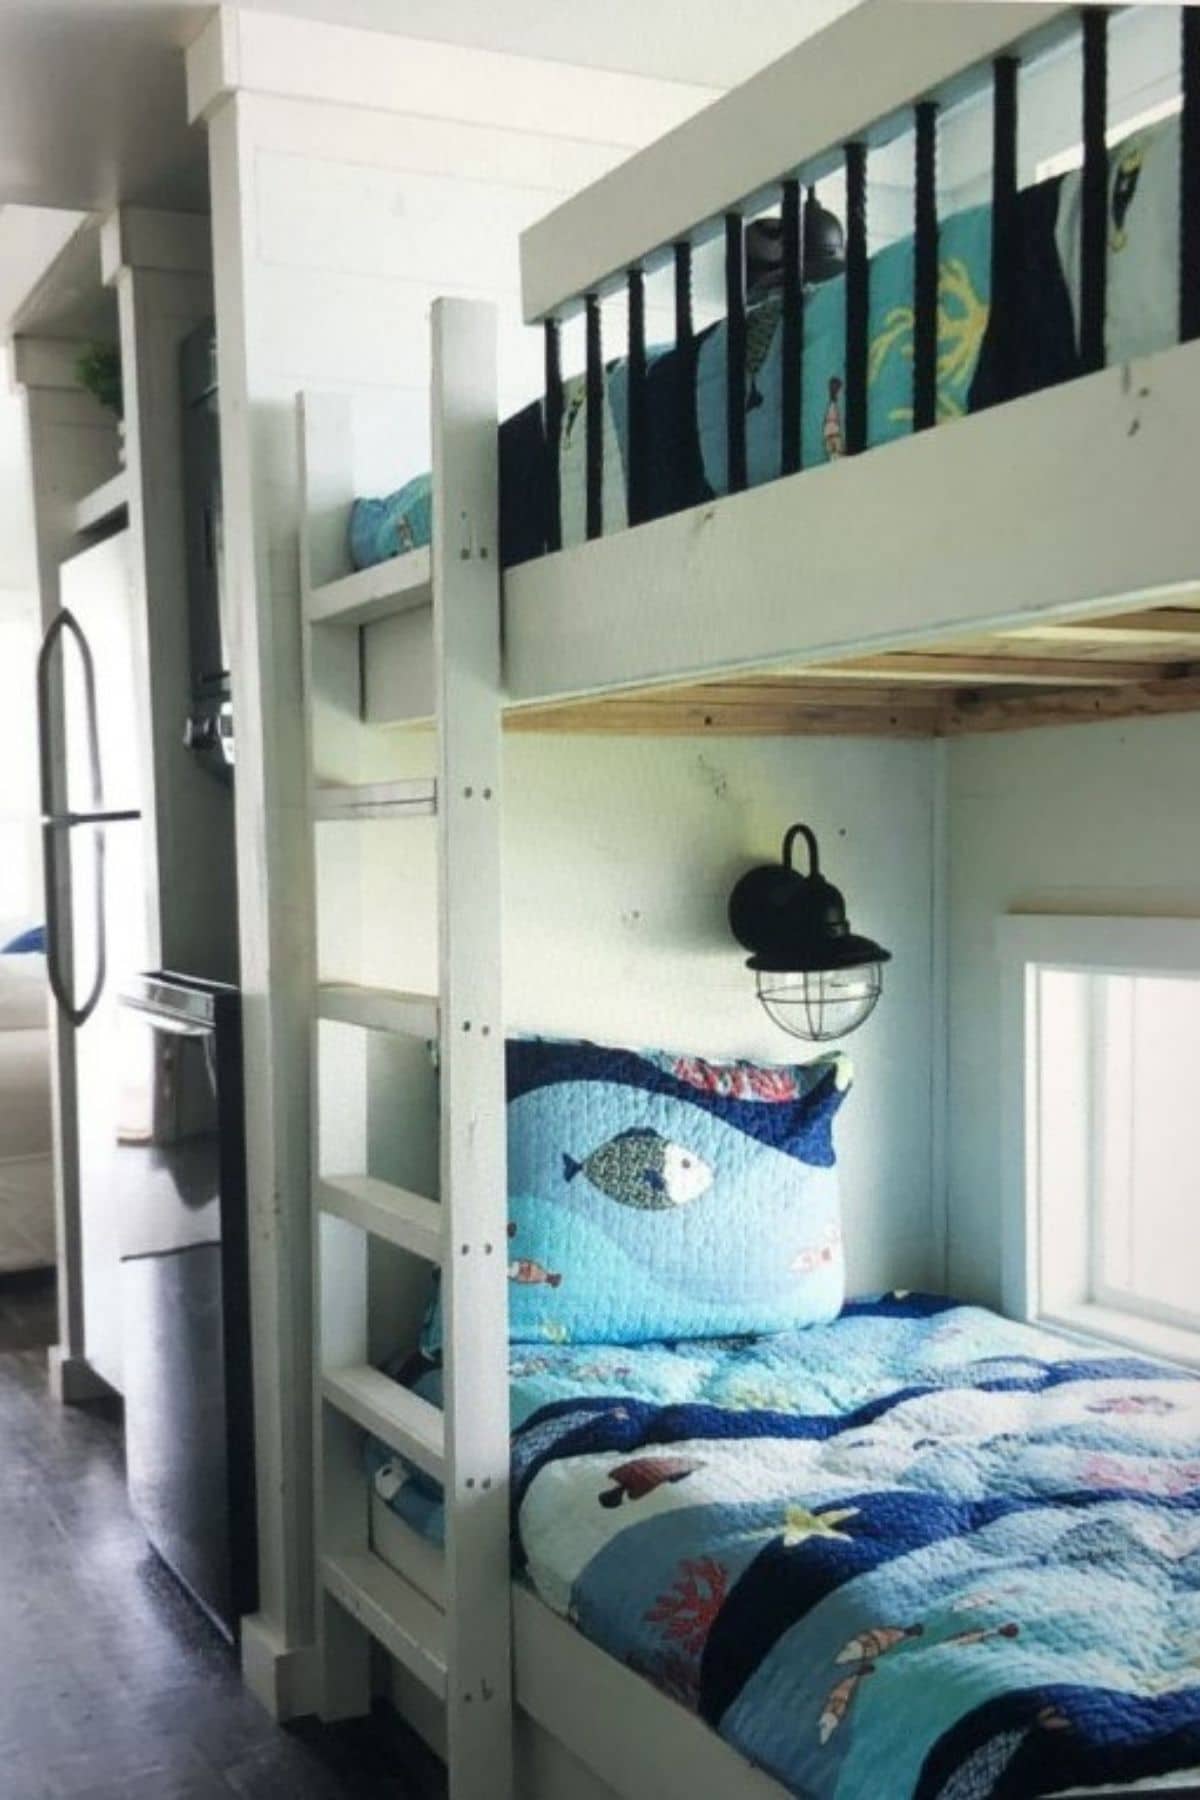 white bunkbeds with blue bedding next to refrigerator